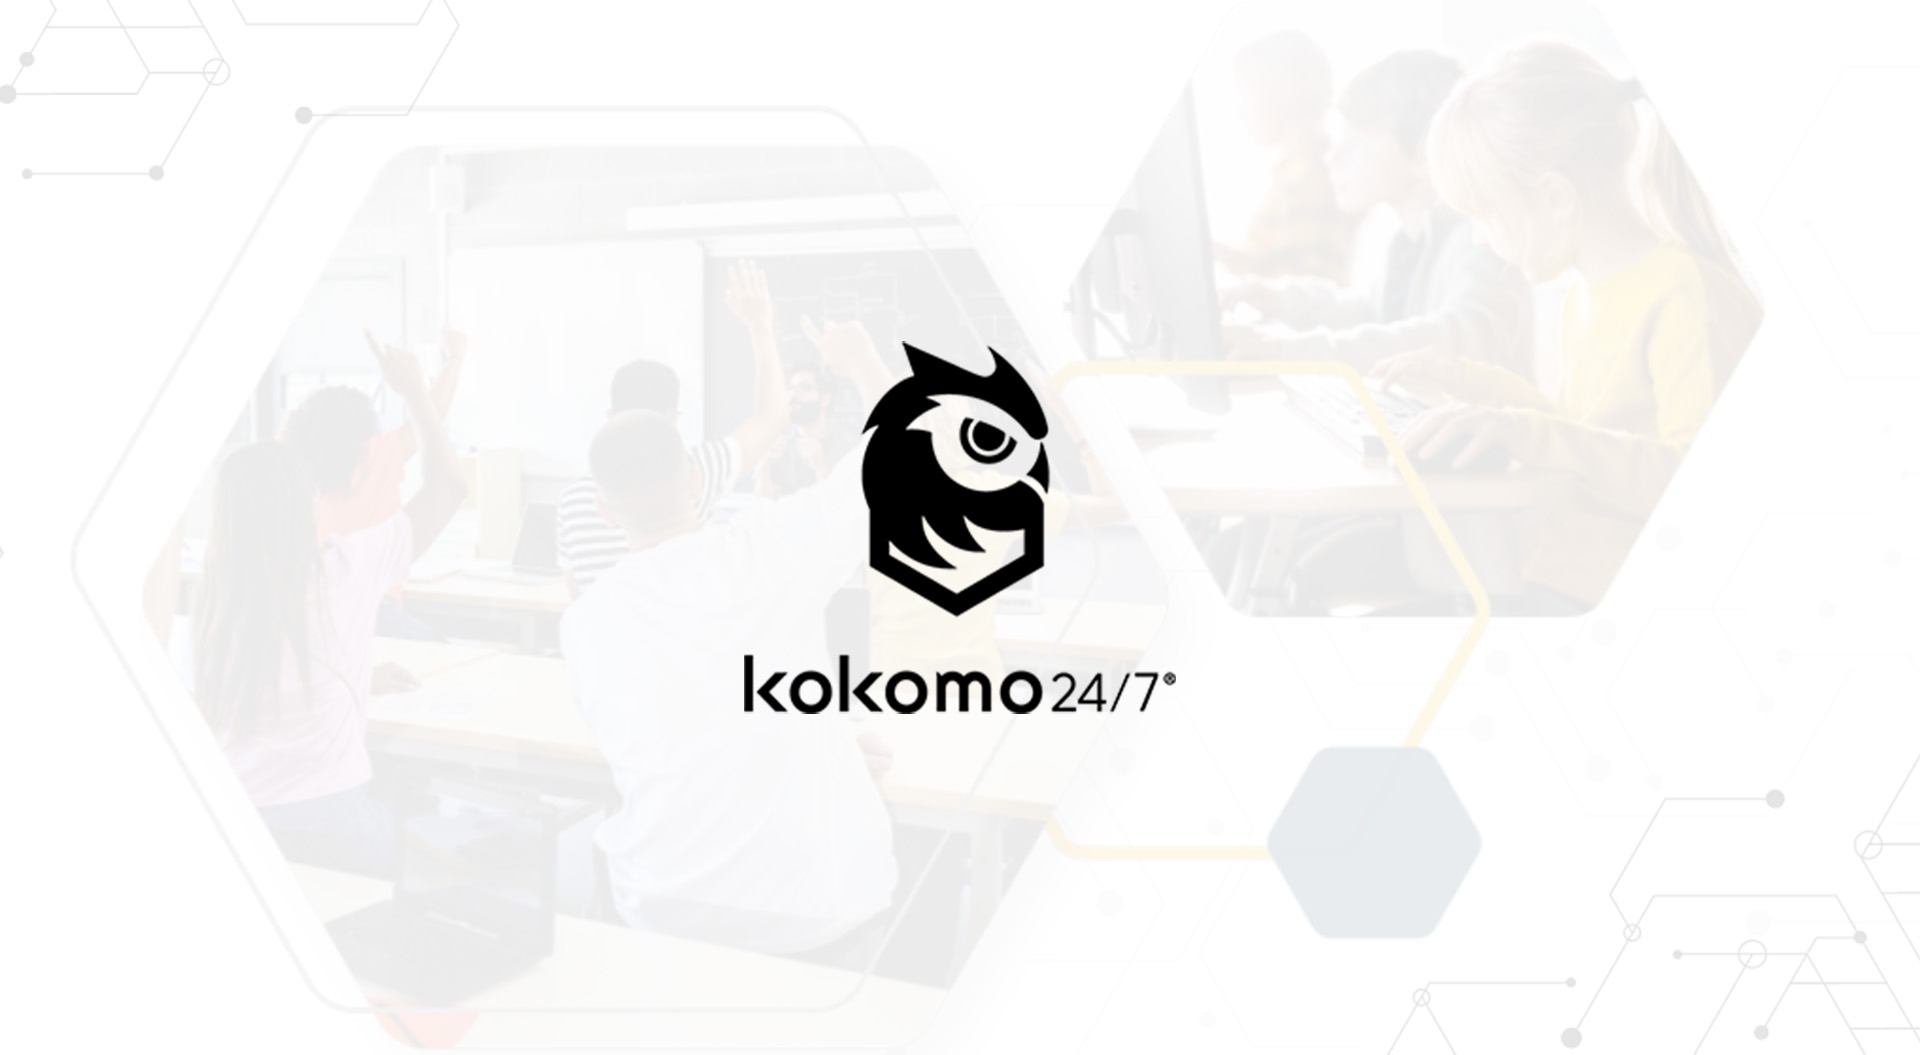 Kokomo24/7® Partners with Critical Response Group® to Further Commitment to Safety